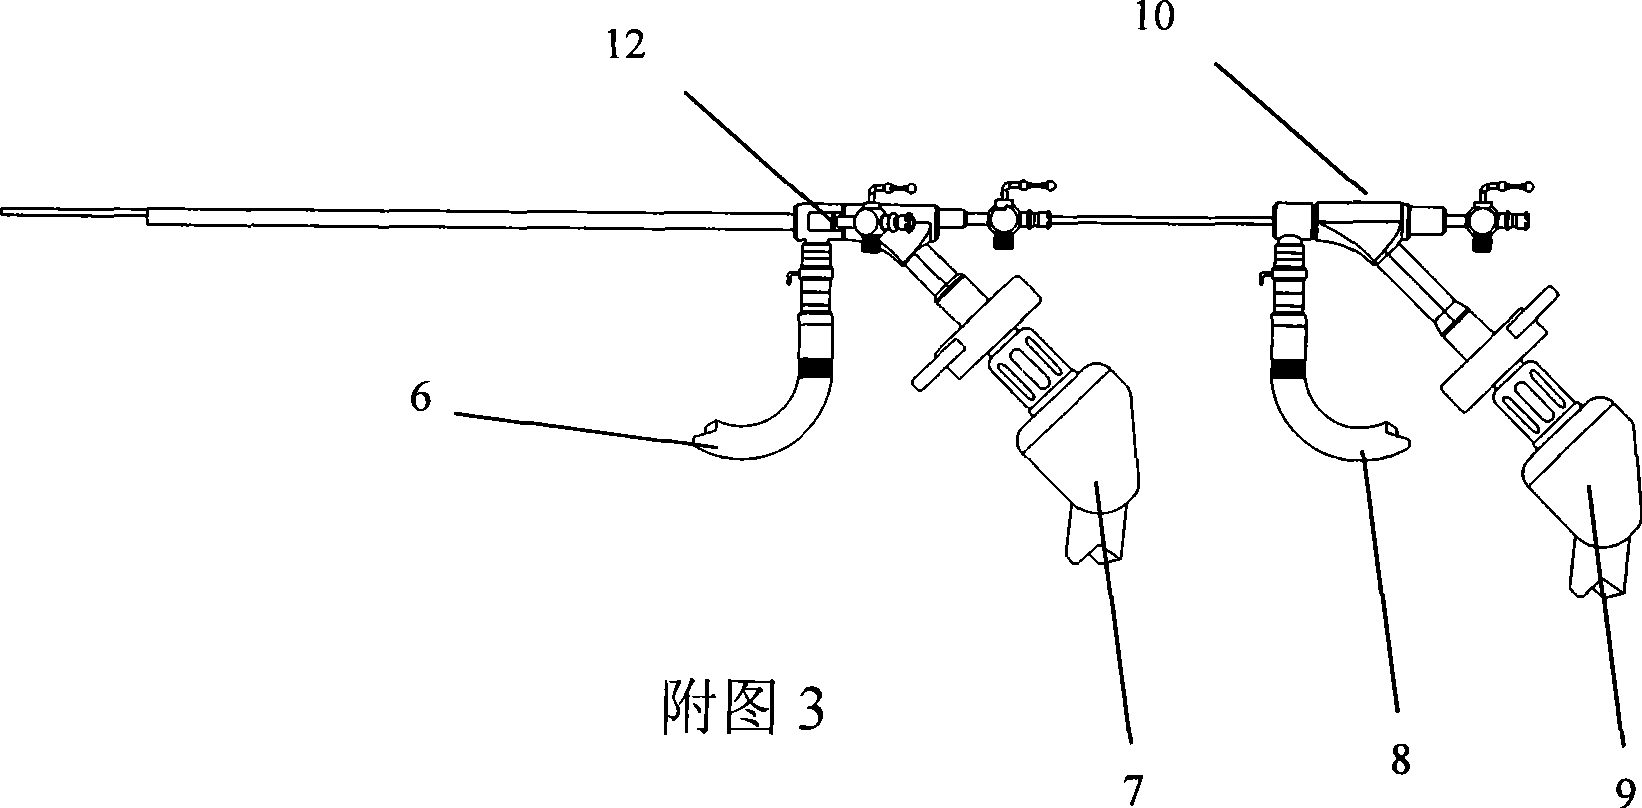 Gallbladder protect series endoscope system and method